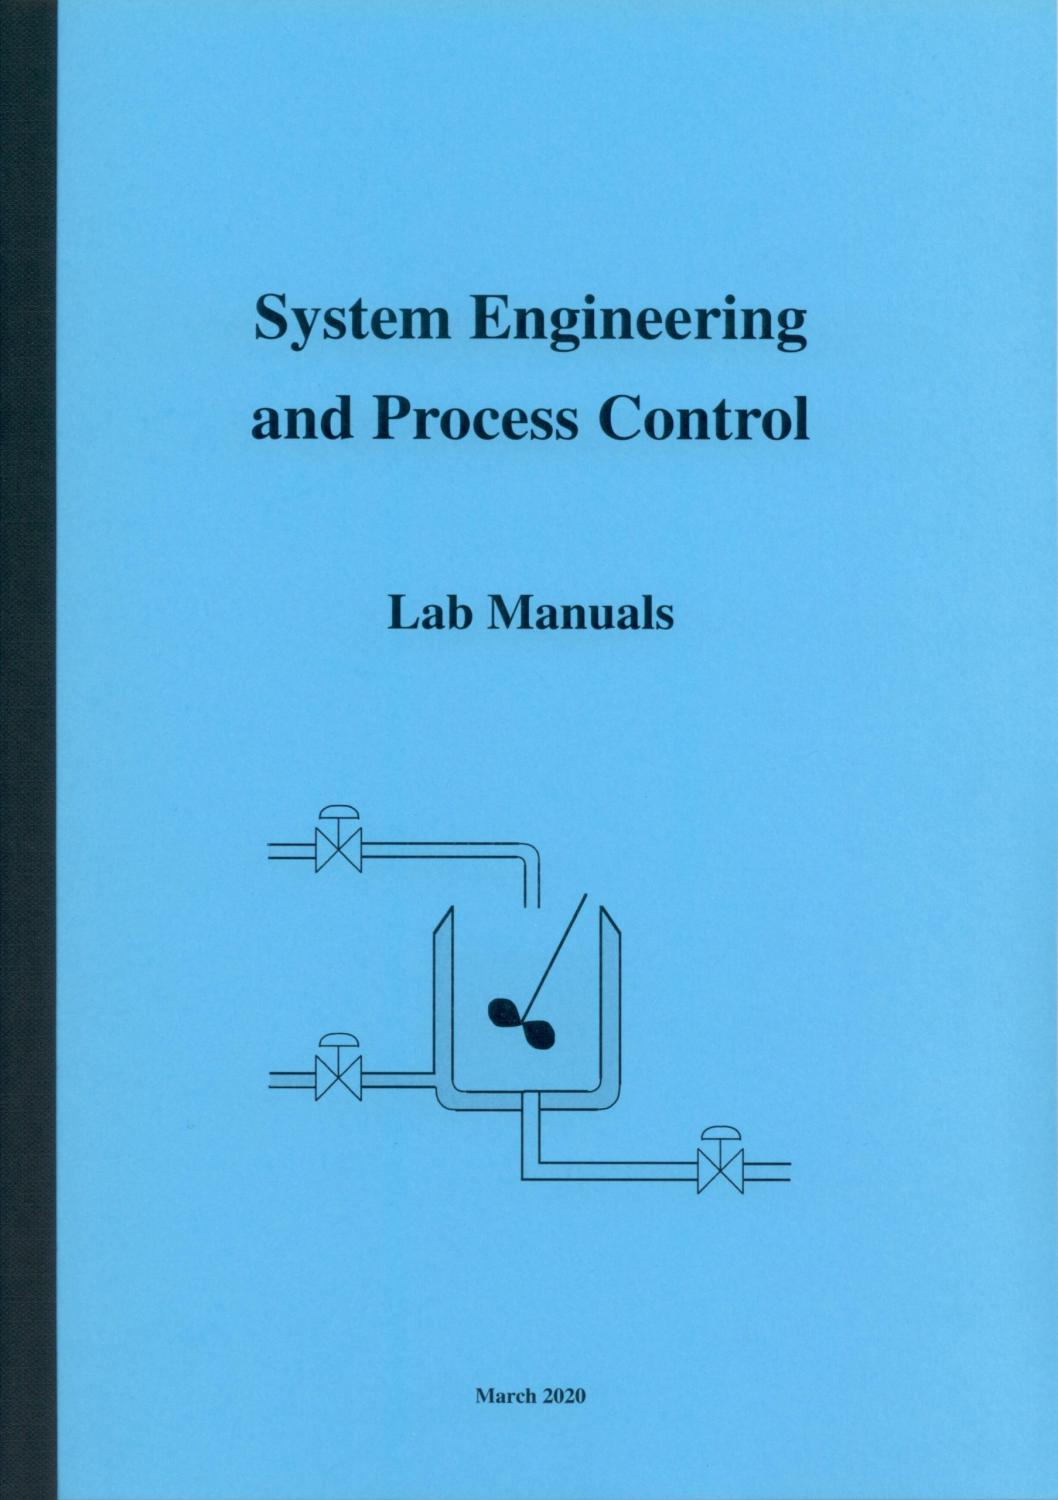 Systems Engineering and Process Control, Lab Manual, 2020